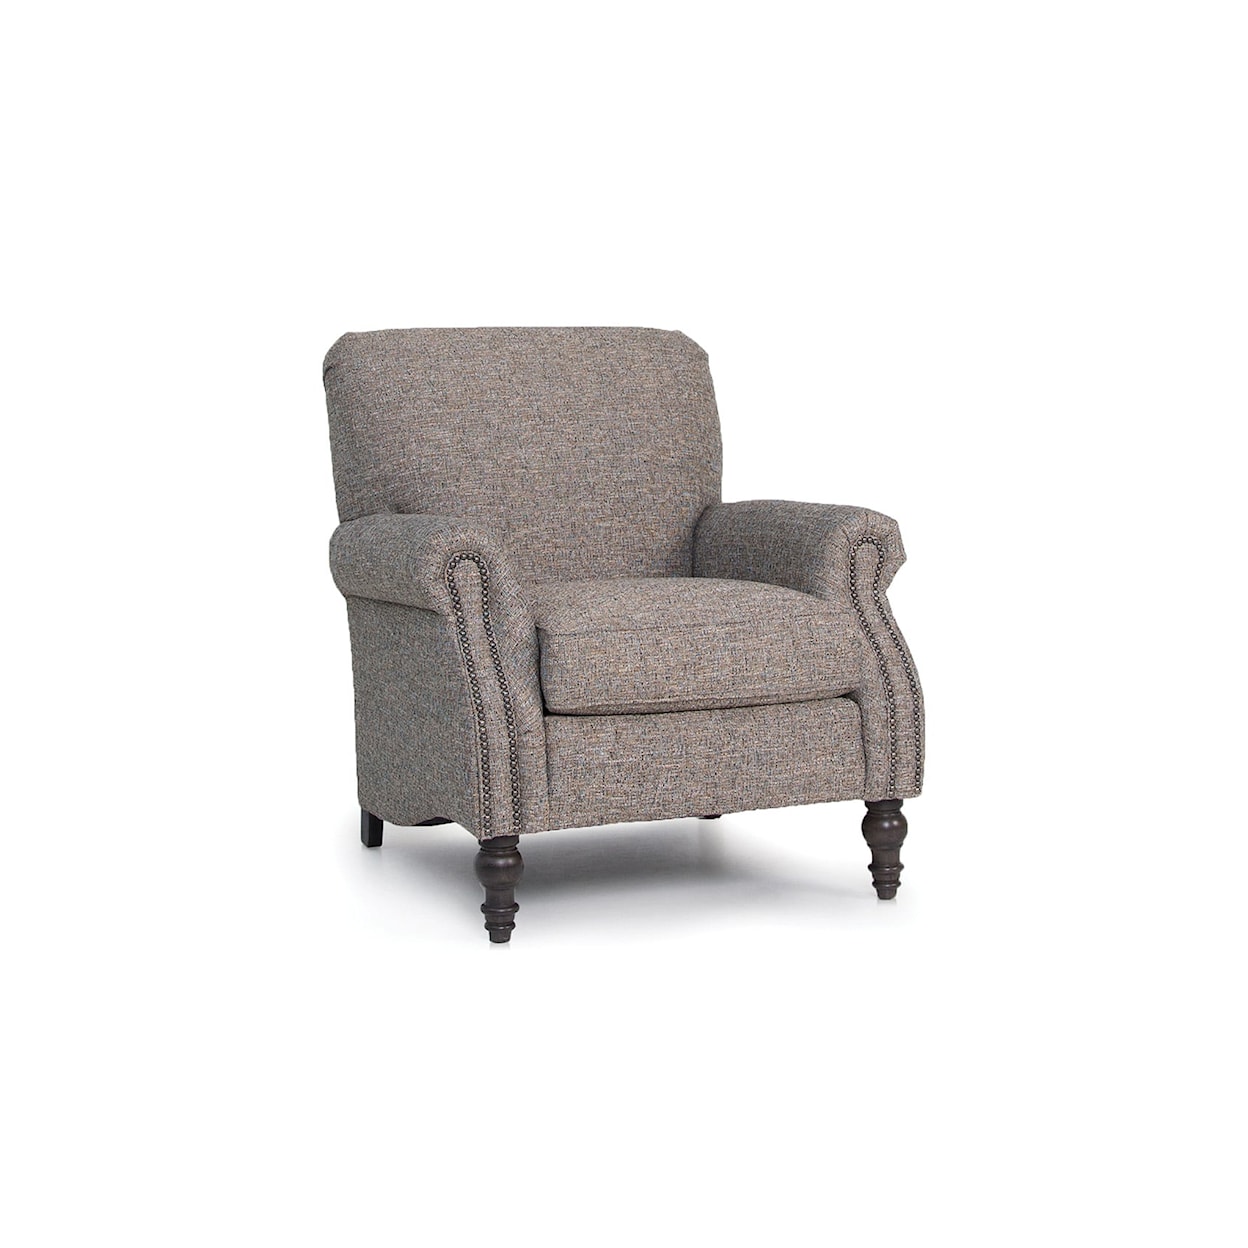 Smith Brothers 568 Upholstered Chair